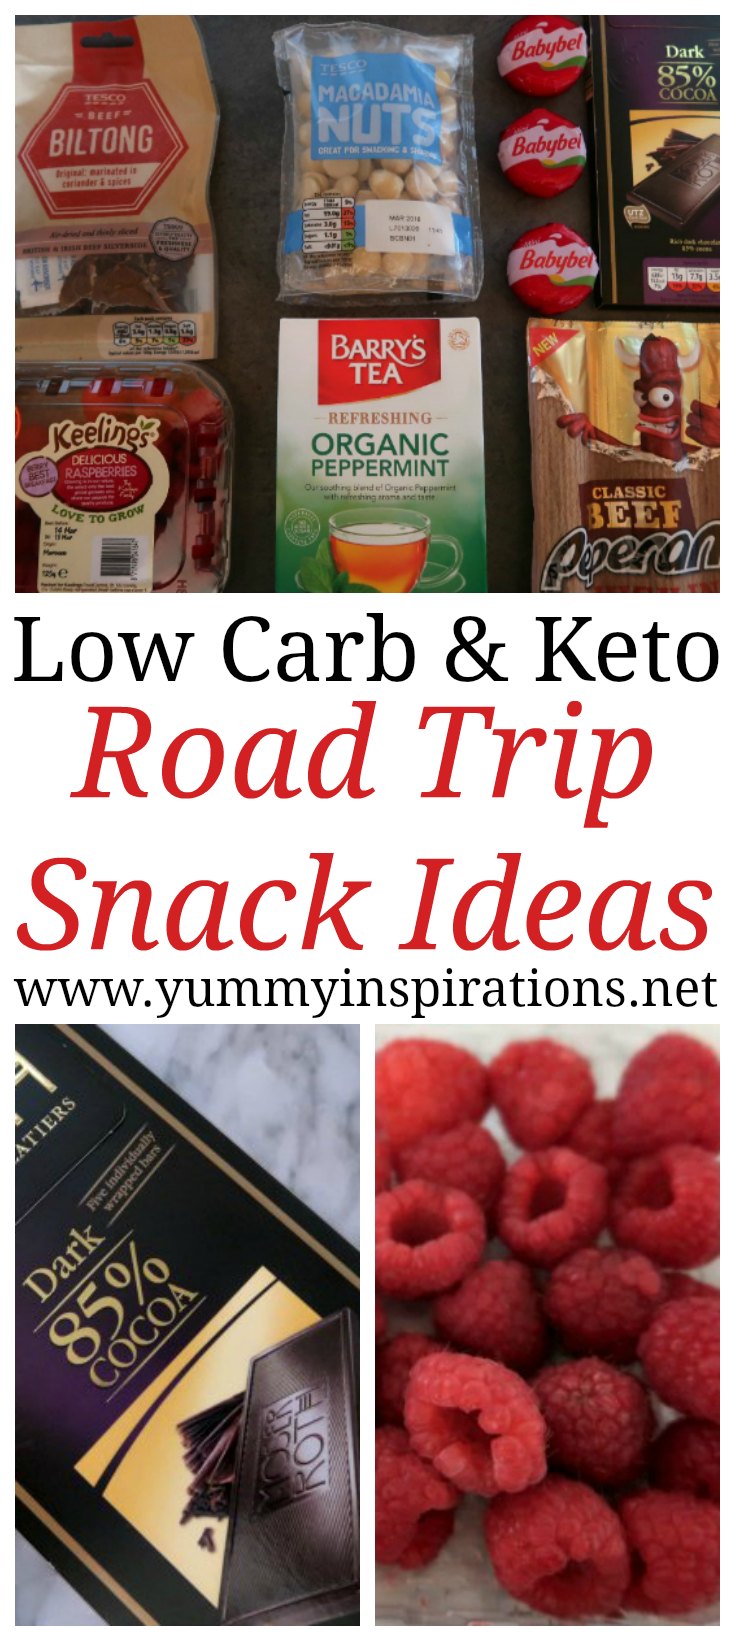 Keto Road Trip Snacks – Ideas for low carb and Ketogenic Diet friendly food for snacks and meals when you travel or for on the go